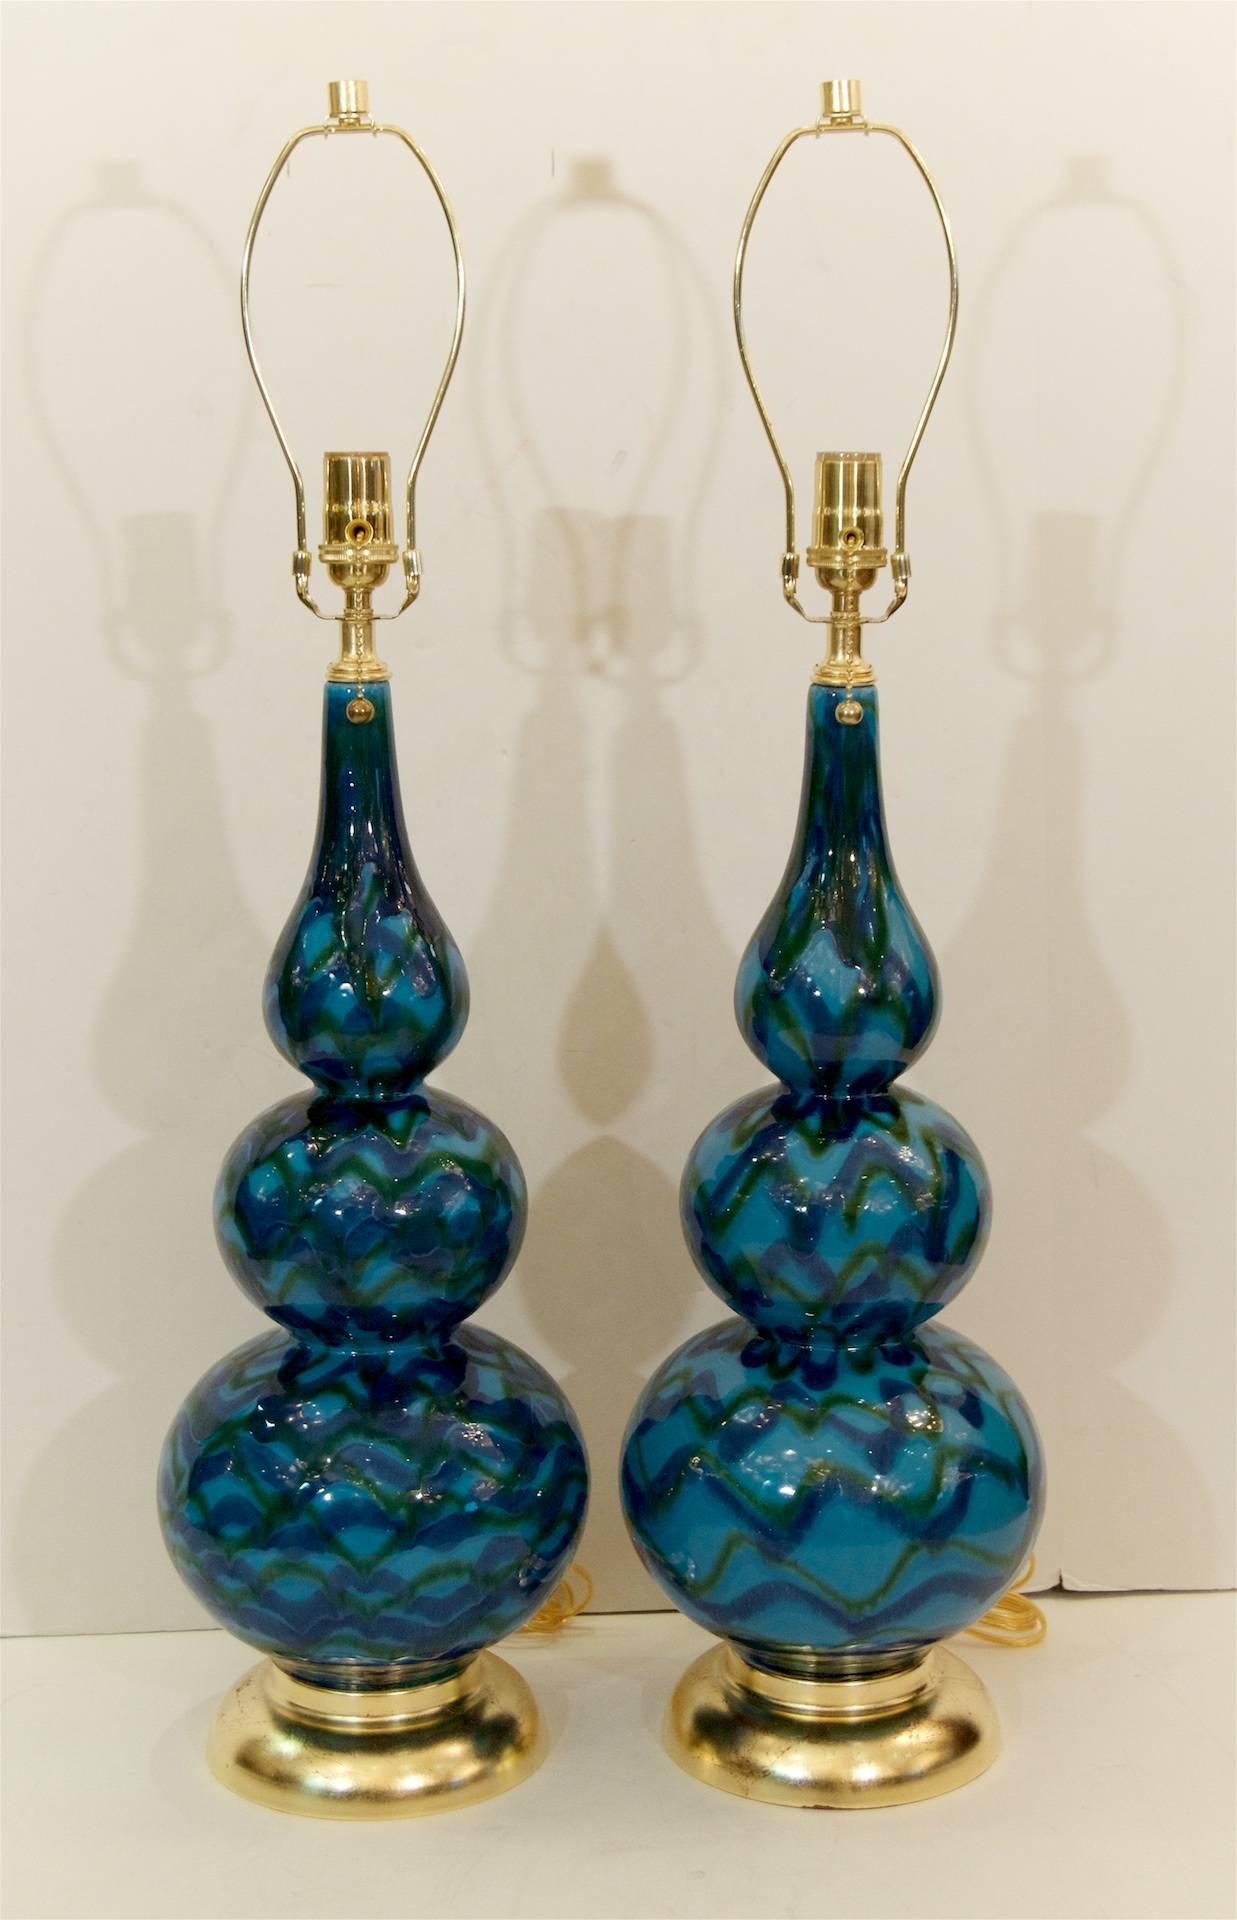 Mid-Century Modern Pair of Blue Glazed Table Lamps with Gold Leaf Hardware